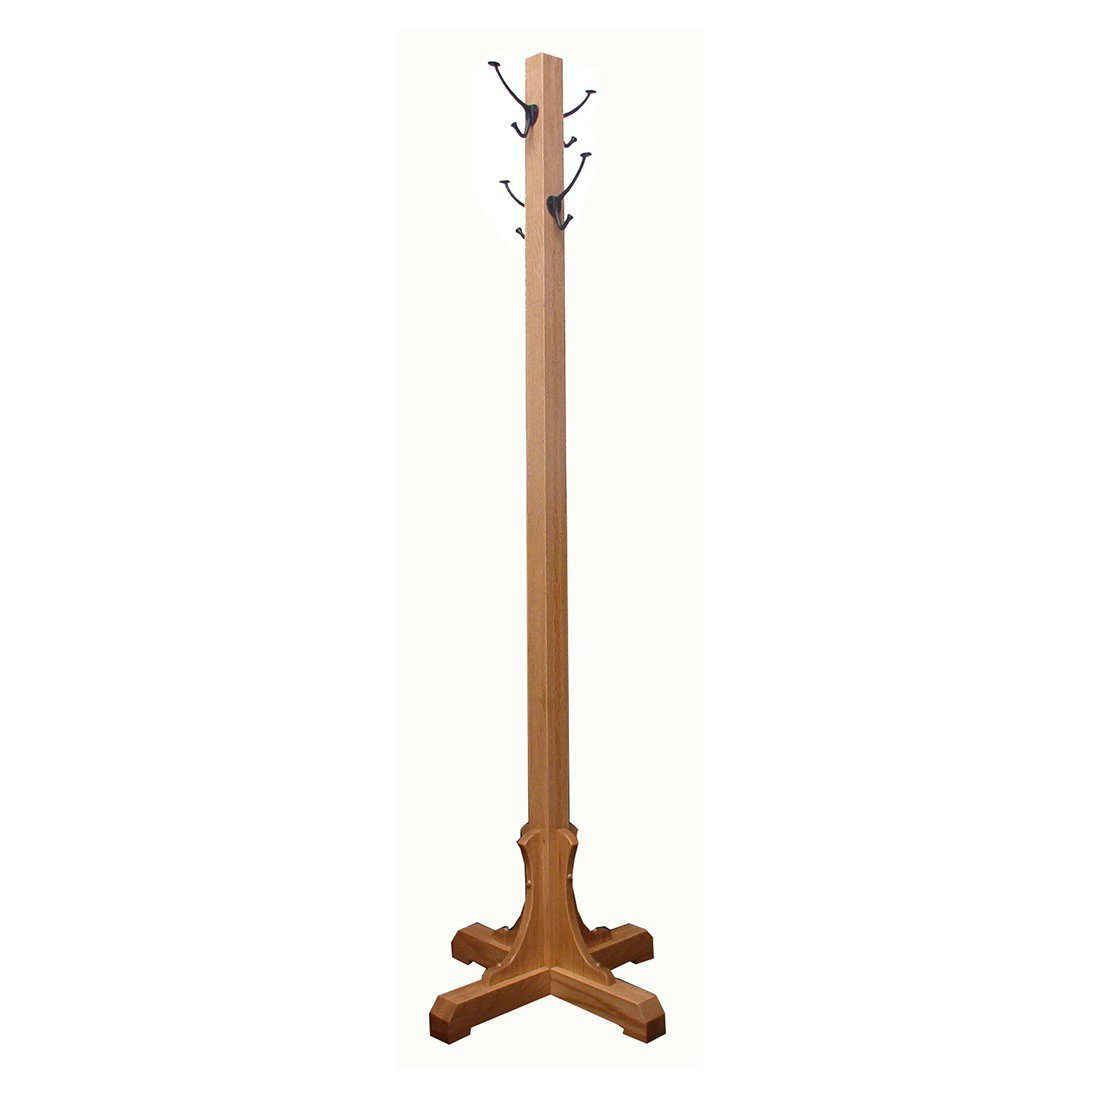 Shaker Coat Rack from DutchCrafters Amish Furniture